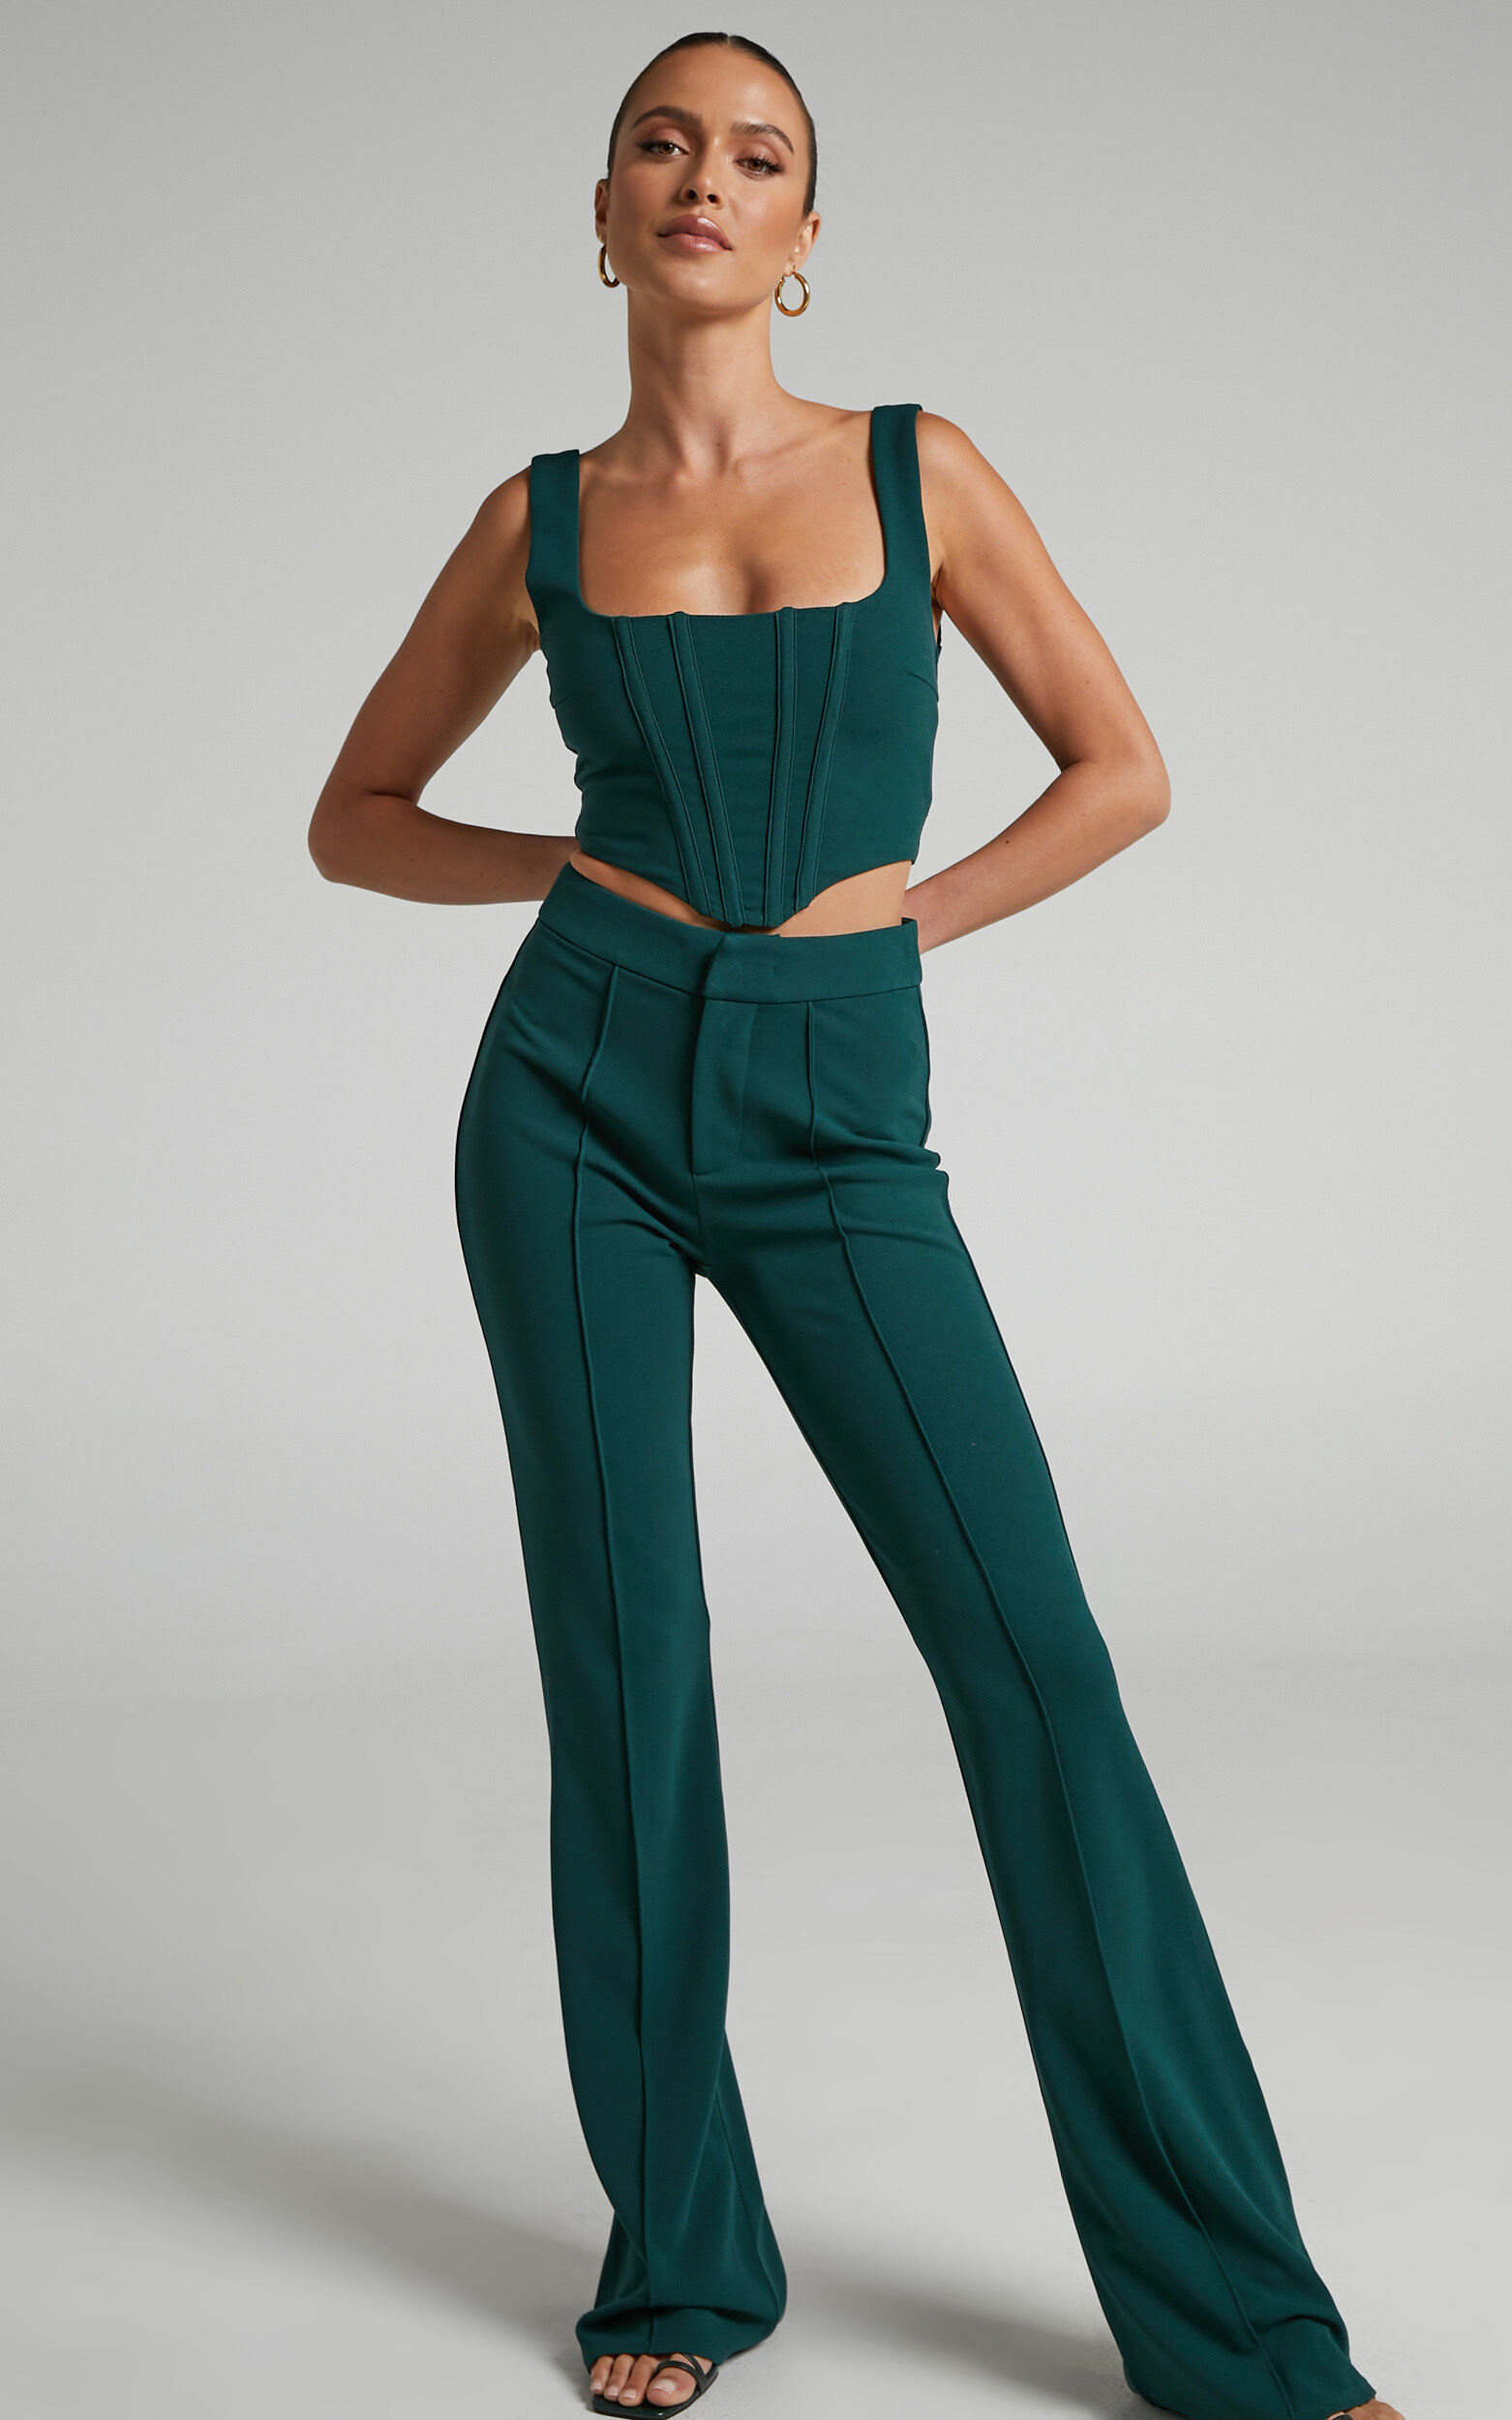 Ritta Two Piece Set - Corset Top and Pants Set in Emerald